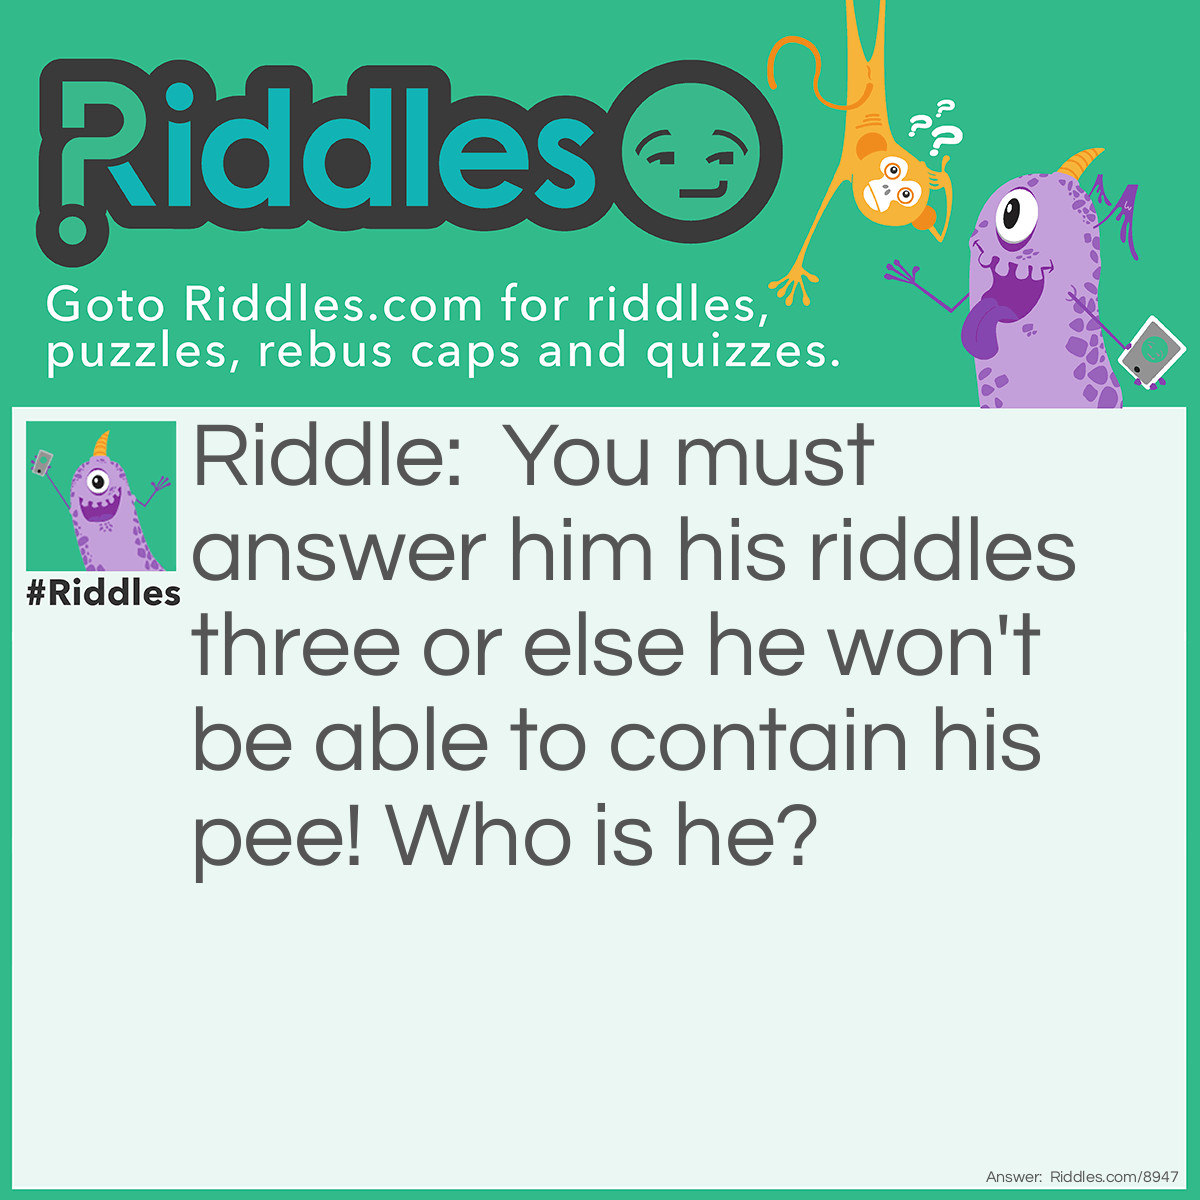 Riddle: You must answer him his riddles three or else he won't be able to contain his pee! Who is he? Answer: Herbie Hancock.